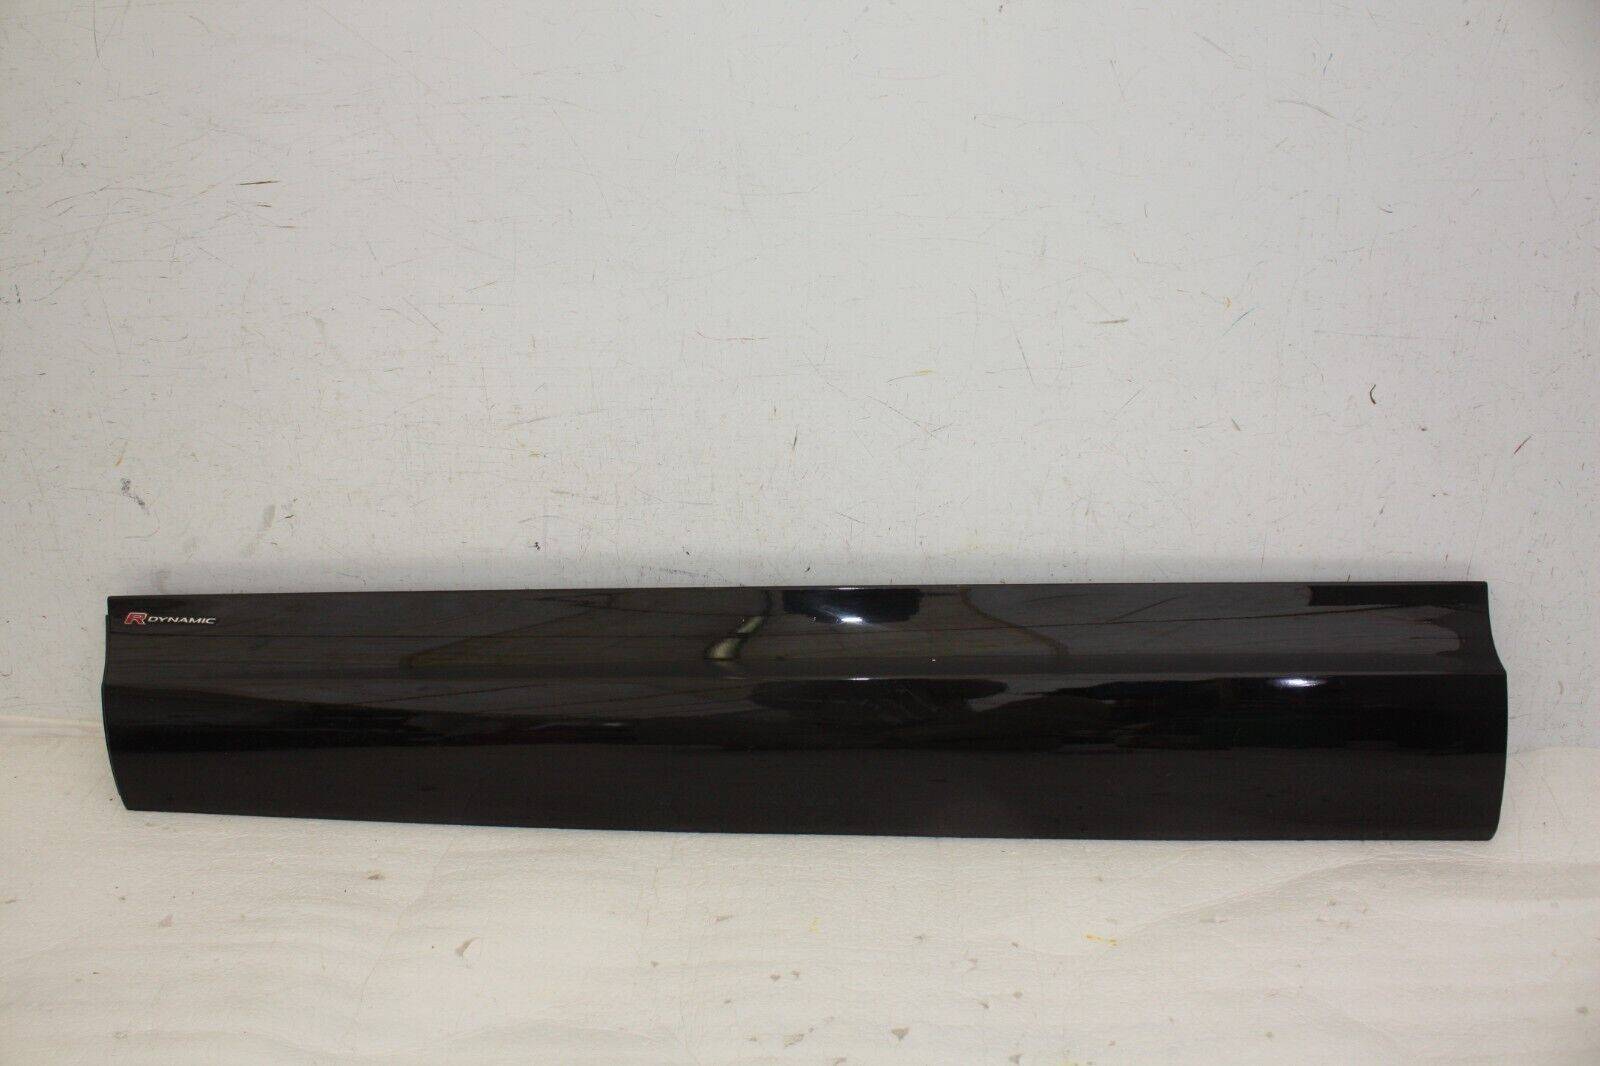 Range Rover Discovery Front Left Door Moulding 2017 ON HY3M 21065 AC Genuine 176407726040